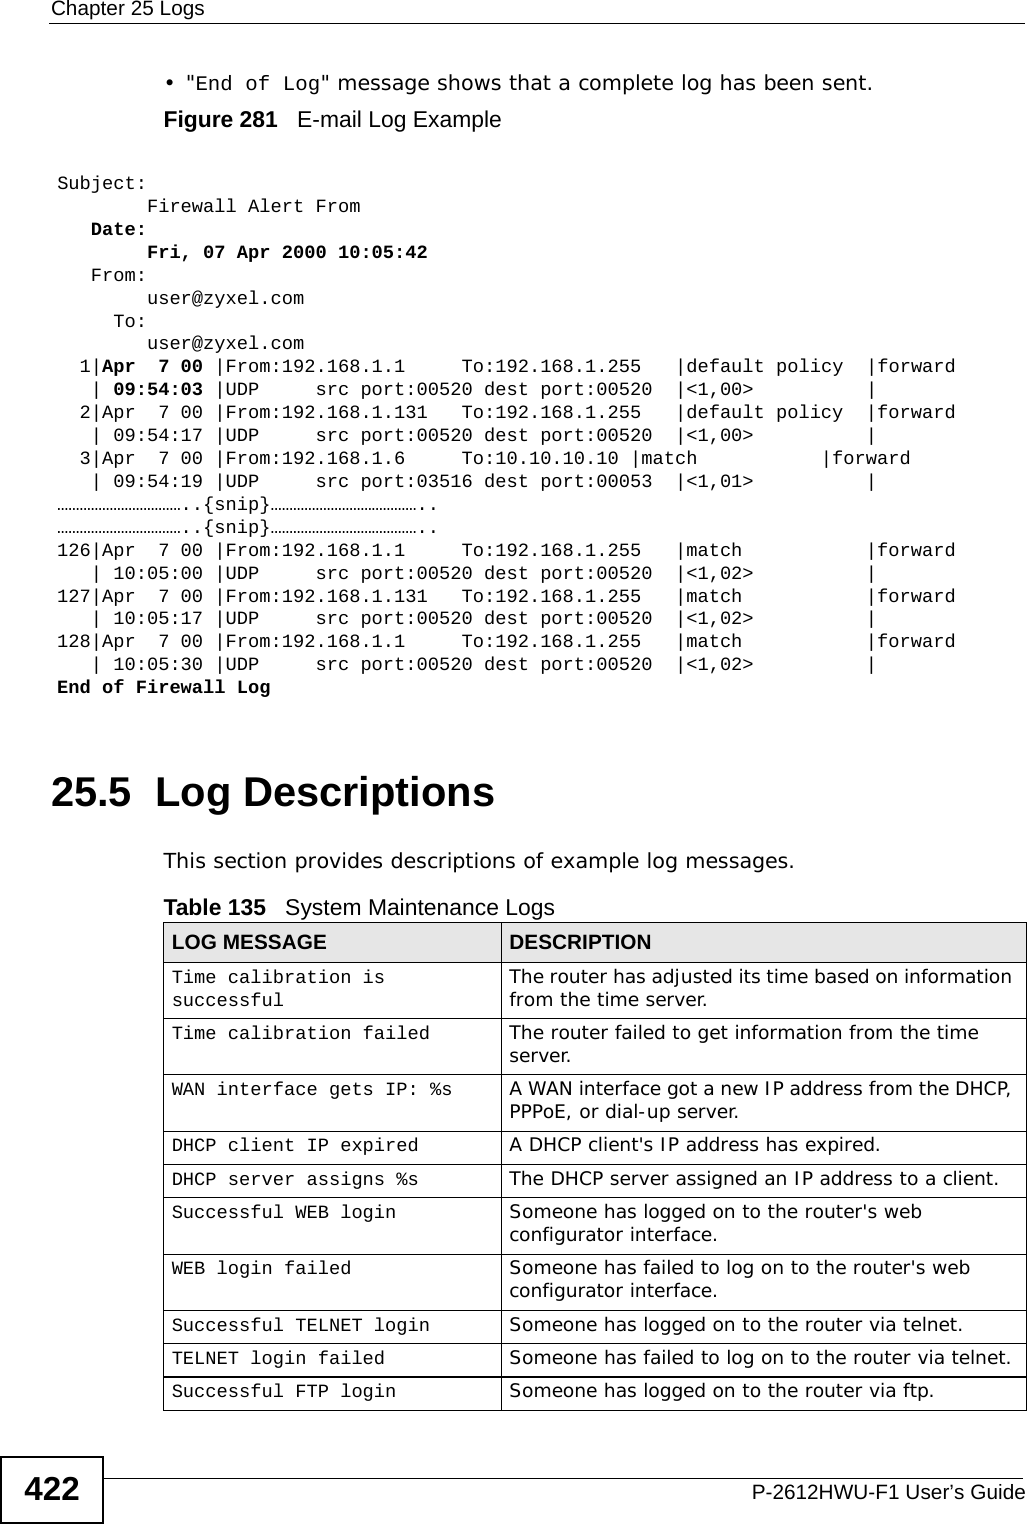 Chapter 25 LogsP-2612HWU-F1 User’s Guide422•&quot;End of Log&quot; message shows that a complete log has been sent.Figure 281   E-mail Log Example25.5  Log DescriptionsThis section provides descriptions of example log messages. Subject:         Firewall Alert From    Date:         Fri, 07 Apr 2000 10:05:42   From:         user@zyxel.com     To:         user@zyxel.com  1|Apr  7 00 |From:192.168.1.1     To:192.168.1.255   |default policy  |forward   | 09:54:03 |UDP     src port:00520 dest port:00520  |&lt;1,00&gt;          |         2|Apr  7 00 |From:192.168.1.131   To:192.168.1.255   |default policy  |forward   | 09:54:17 |UDP     src port:00520 dest port:00520  |&lt;1,00&gt;          |         3|Apr  7 00 |From:192.168.1.6     To:10.10.10.10 |match           |forward   | 09:54:19 |UDP     src port:03516 dest port:00053  |&lt;1,01&gt;          |       ……………………………..{snip}…………………………………..……………………………..{snip}…………………………………..126|Apr  7 00 |From:192.168.1.1     To:192.168.1.255   |match           |forward   | 10:05:00 |UDP     src port:00520 dest port:00520  |&lt;1,02&gt;          |       127|Apr  7 00 |From:192.168.1.131   To:192.168.1.255   |match           |forward   | 10:05:17 |UDP     src port:00520 dest port:00520  |&lt;1,02&gt;          |       128|Apr  7 00 |From:192.168.1.1     To:192.168.1.255   |match           |forward   | 10:05:30 |UDP     src port:00520 dest port:00520  |&lt;1,02&gt;          |       End of Firewall LogTable 135   System Maintenance LogsLOG MESSAGE DESCRIPTIONTime calibration is successful The router has adjusted its time based on information from the time server.Time calibration failed The router failed to get information from the time server.WAN interface gets IP: %s A WAN interface got a new IP address from the DHCP, PPPoE, or dial-up server.DHCP client IP expired A DHCP client&apos;s IP address has expired.DHCP server assigns %s The DHCP server assigned an IP address to a client.Successful WEB login Someone has logged on to the router&apos;s web configurator interface.WEB login failed Someone has failed to log on to the router&apos;s web configurator interface.Successful TELNET login Someone has logged on to the router via telnet.TELNET login failed Someone has failed to log on to the router via telnet.Successful FTP login Someone has logged on to the router via ftp.